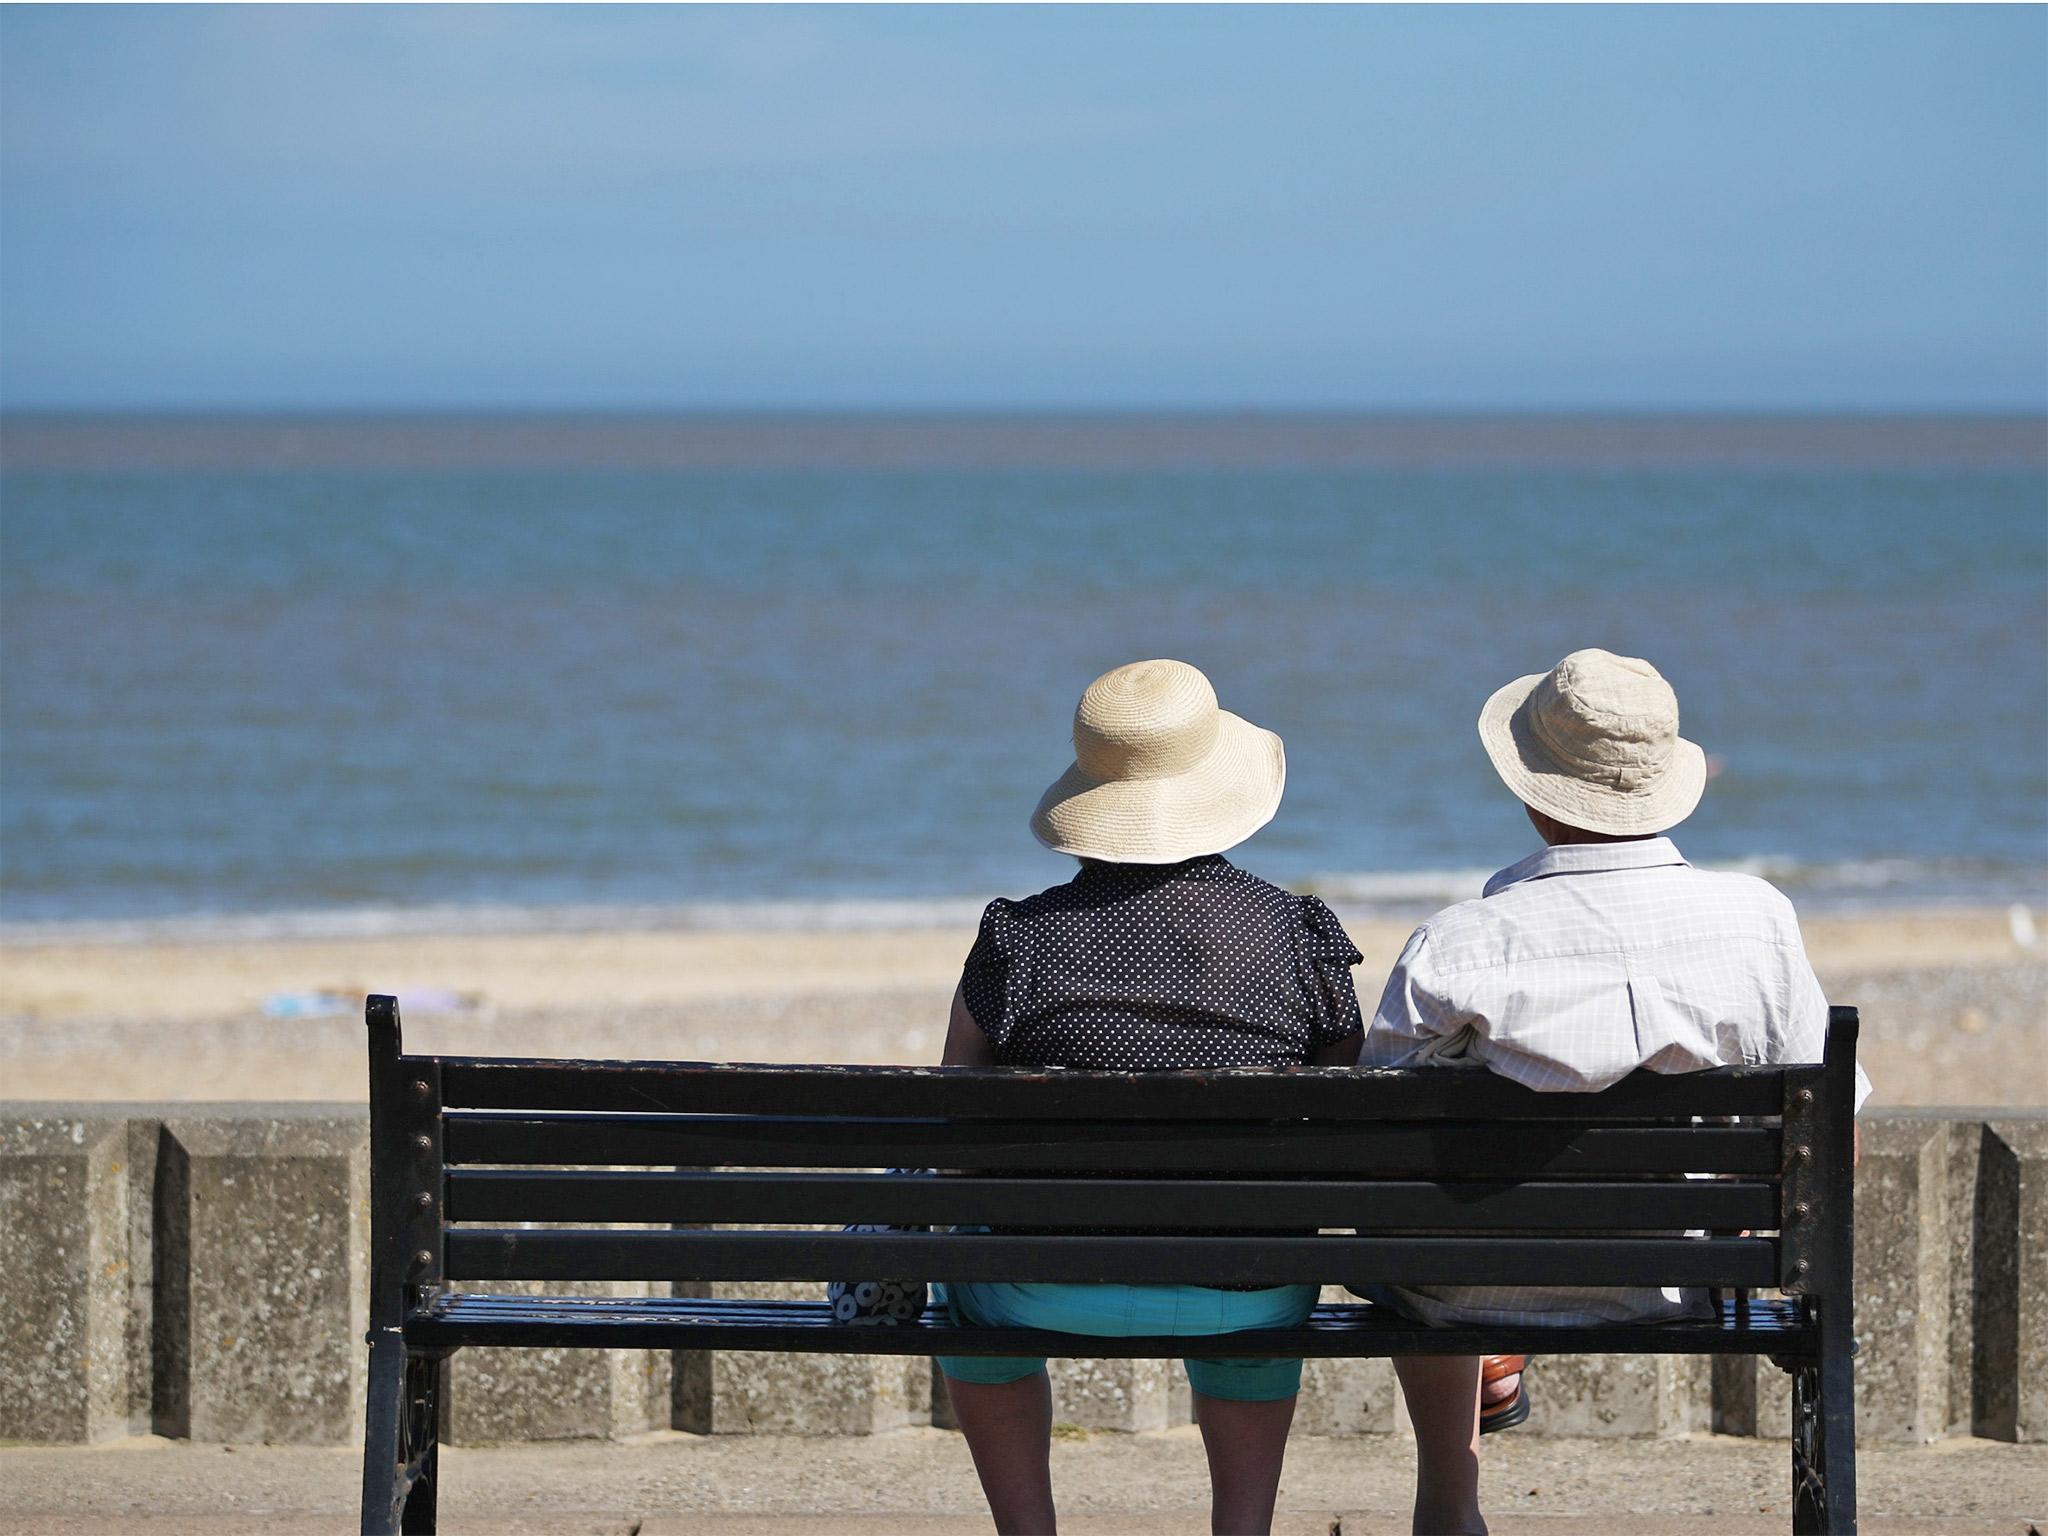 Many older people do not get enough vitamin D because of lack of sunlight or poor diet